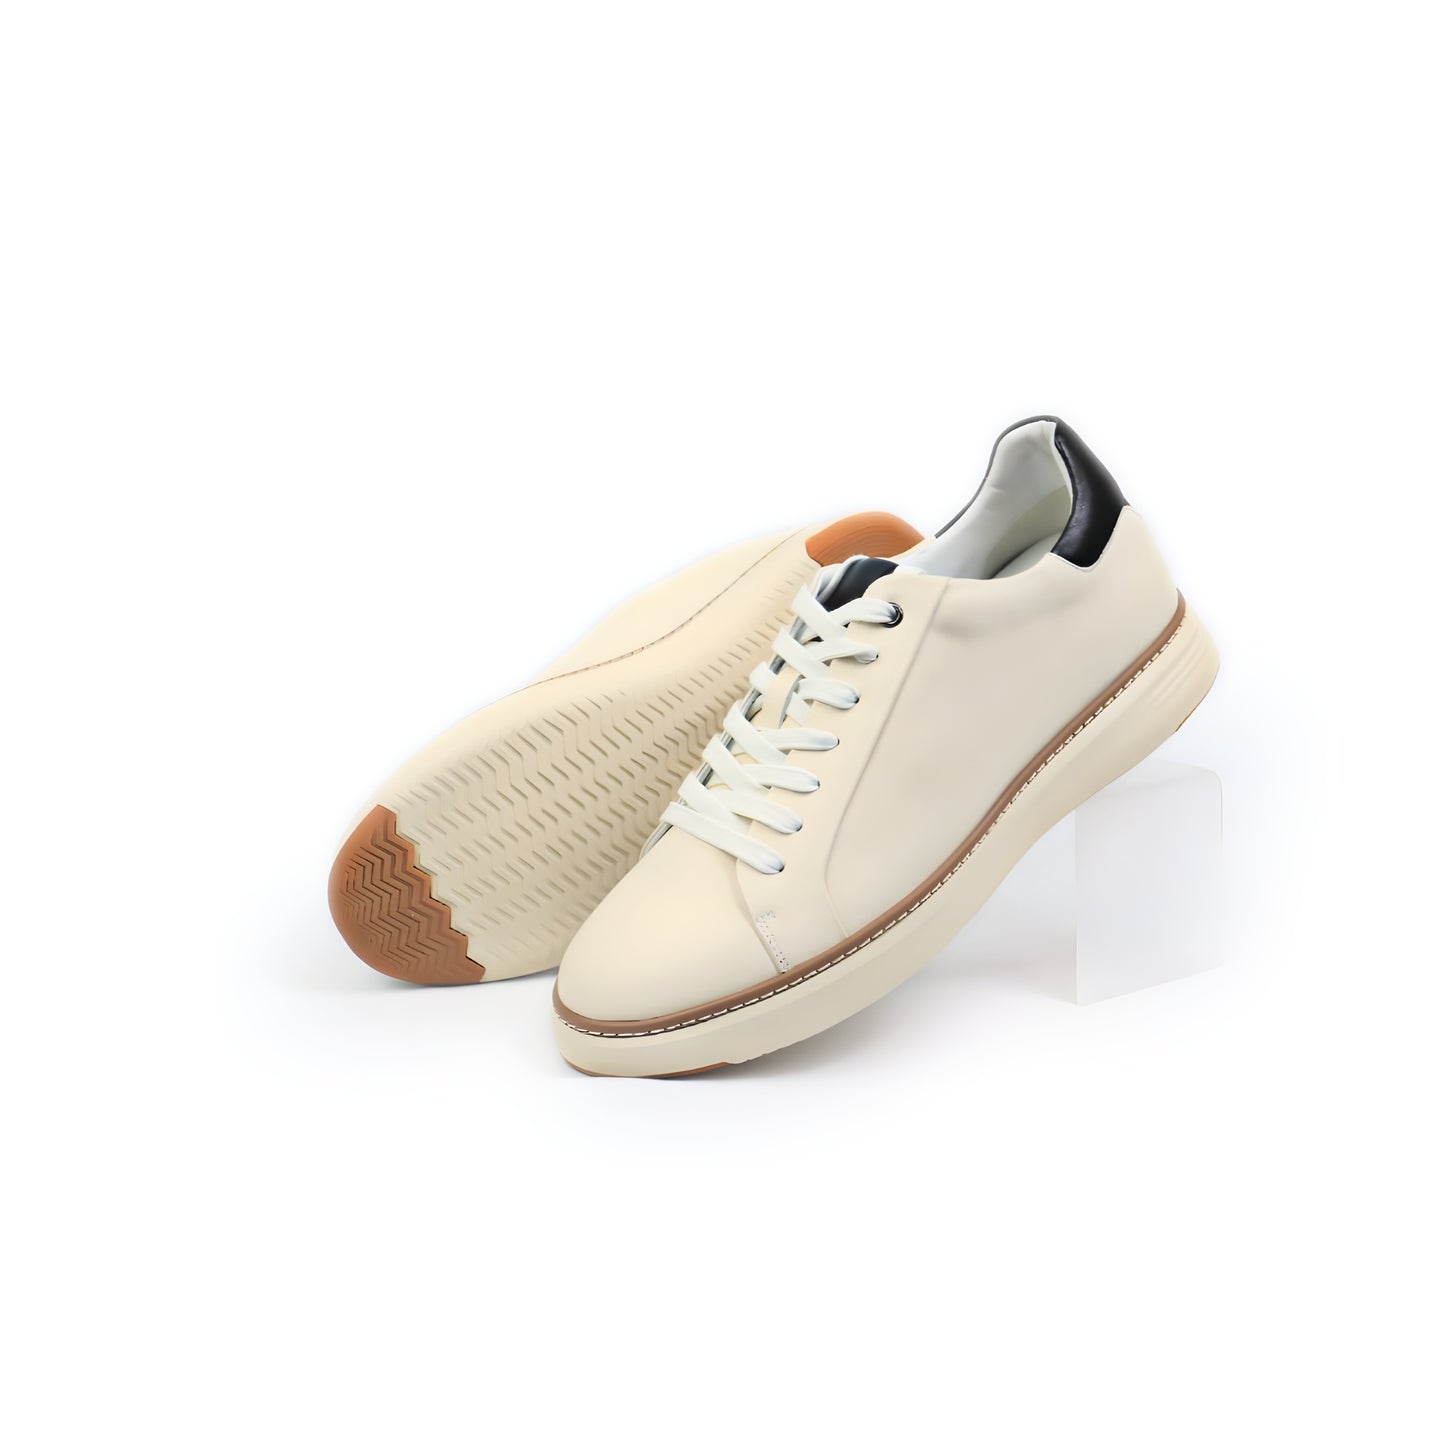 Volo Alte Chaves Lightweight Elevator Sneakers